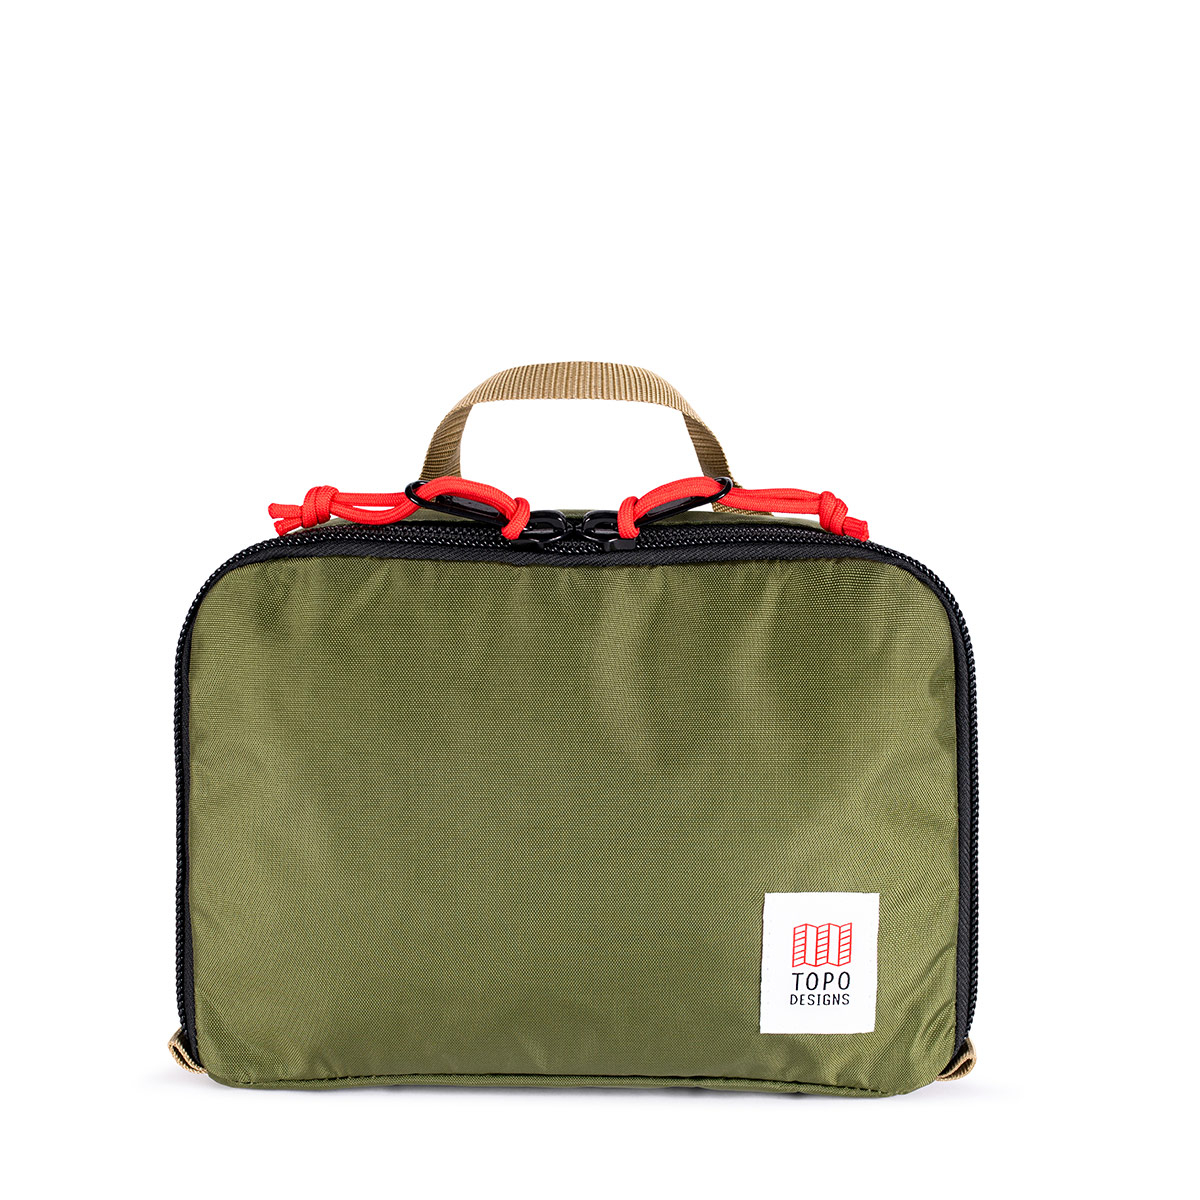 Topo Designs Pack Bag 5L Olive, a simple, durable and highly functional way to organize your luggage